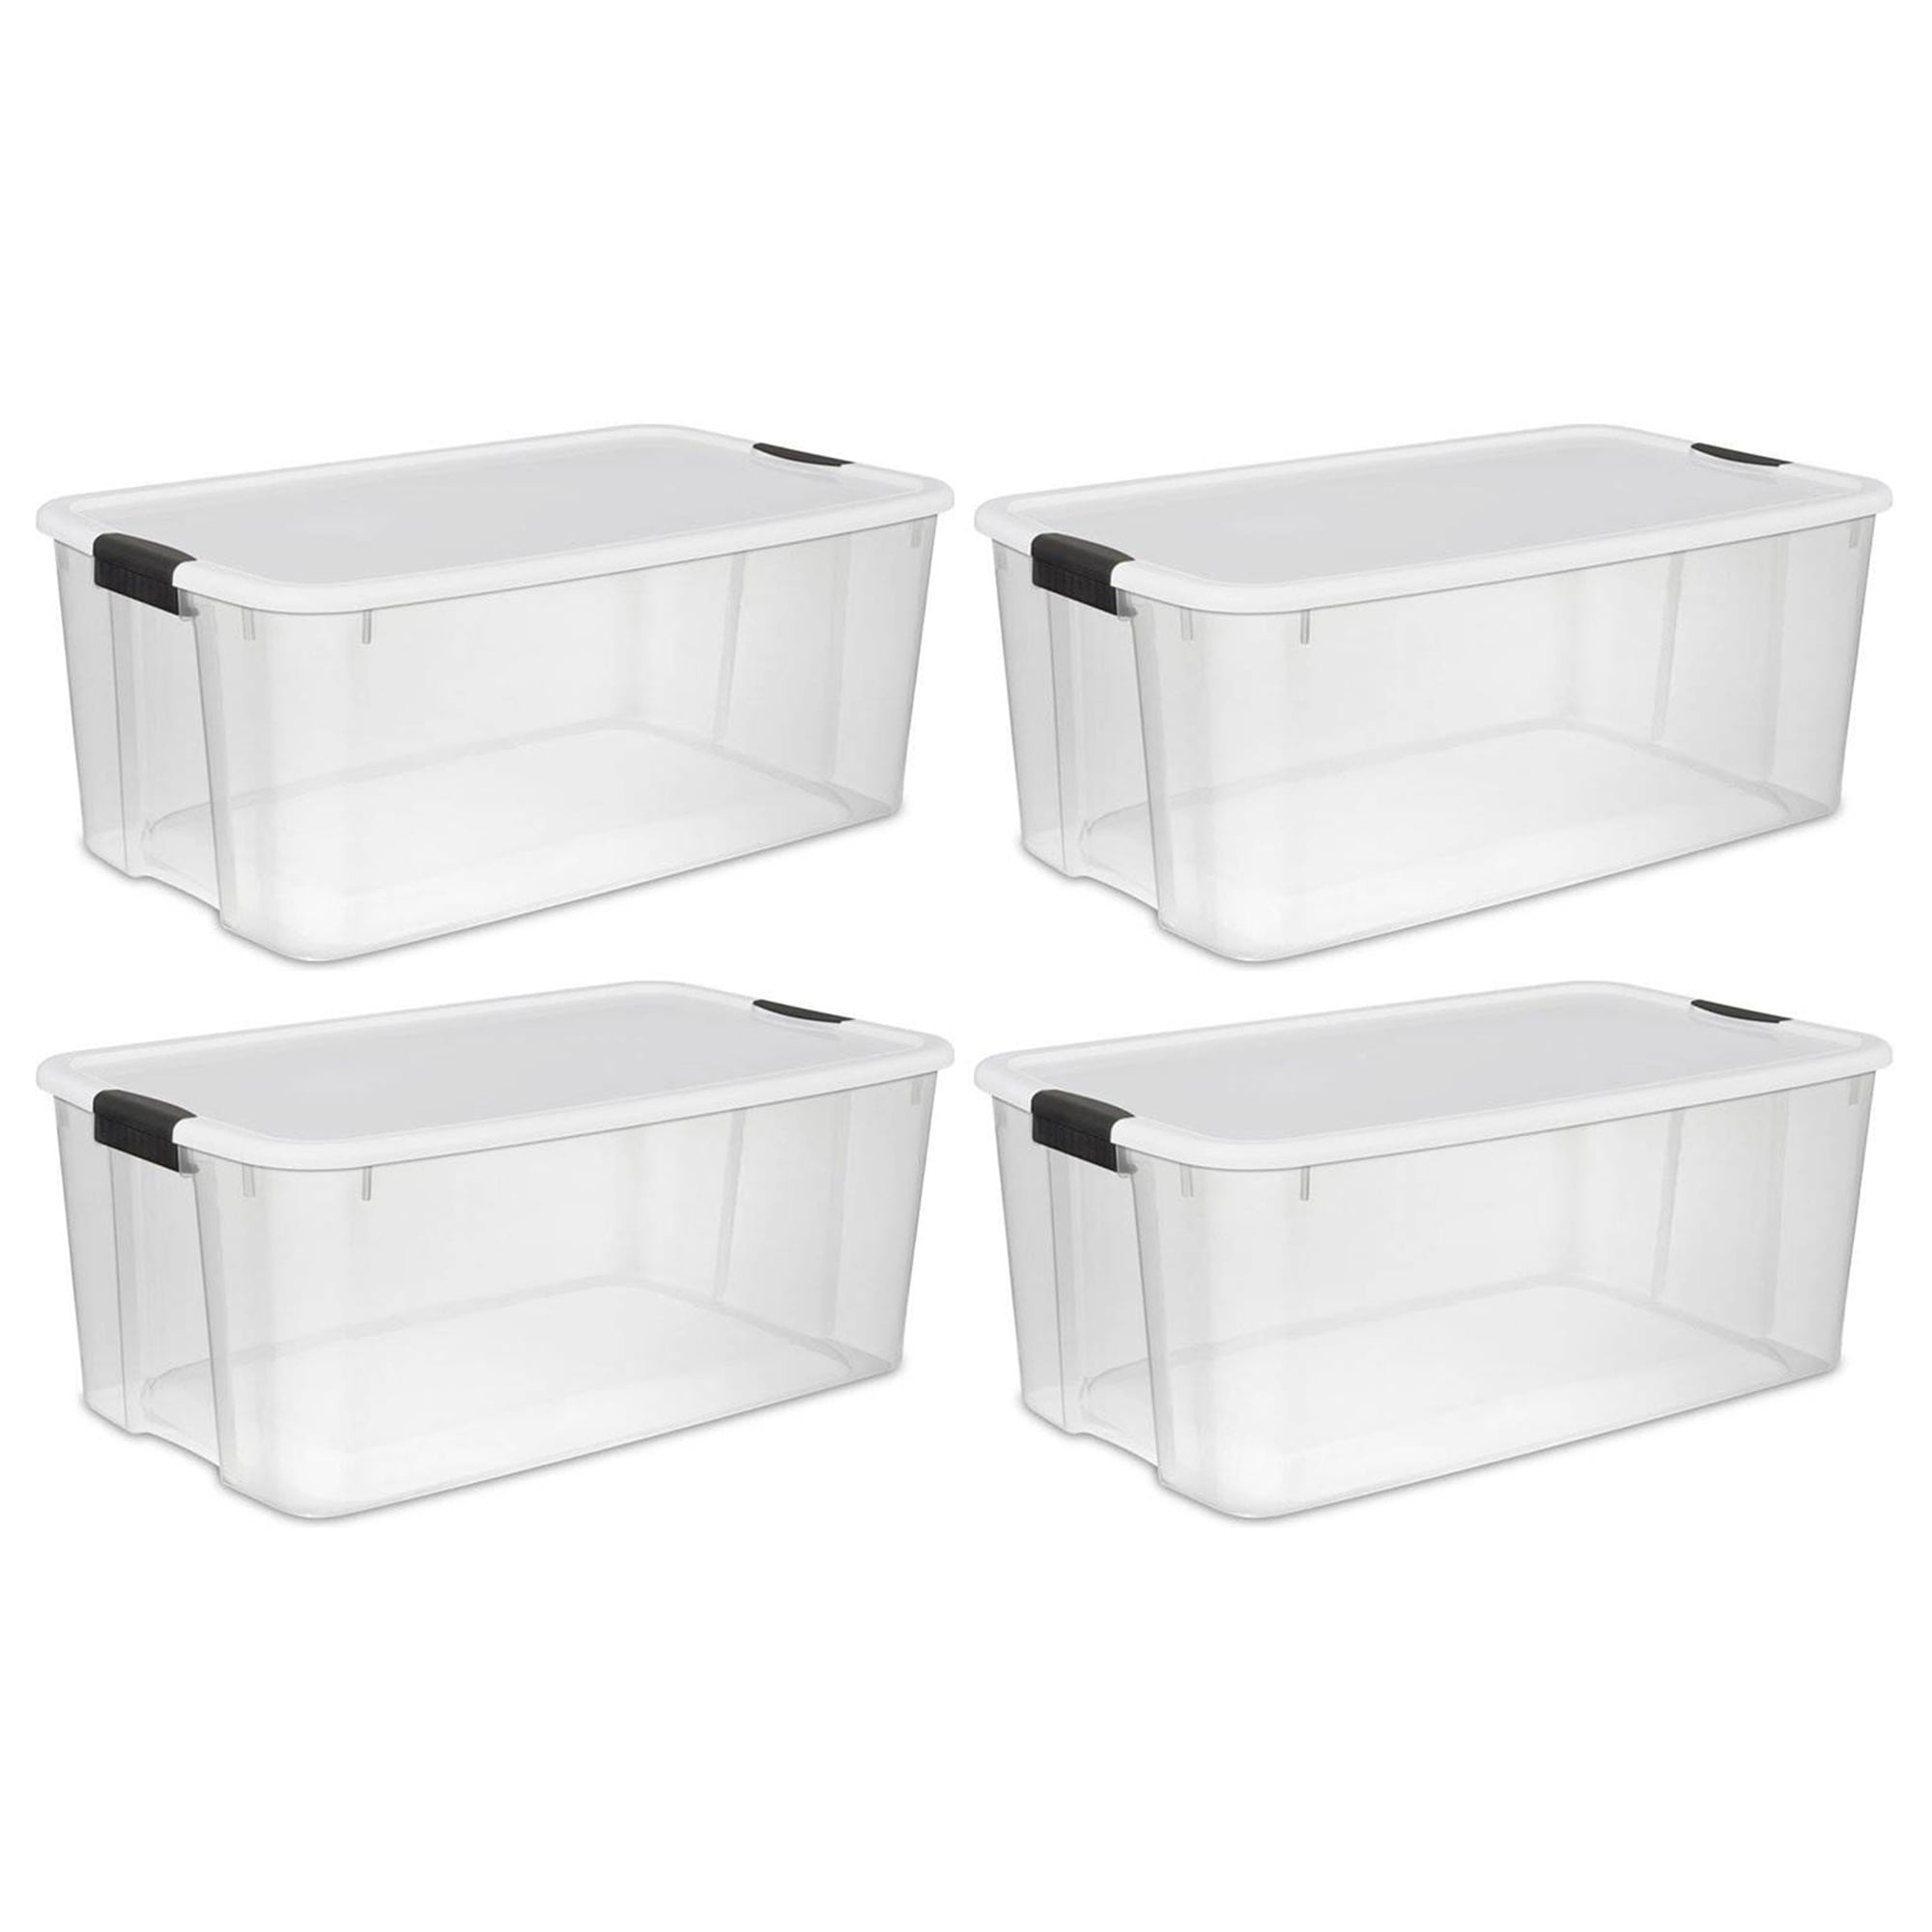 Sterilite 18 Qt Ultra Latch Box, Stackable Storage Bin with Lid, Plastic  Container with Heavy Duty Latches to Organize, Clear and White Lid, 6-Pack